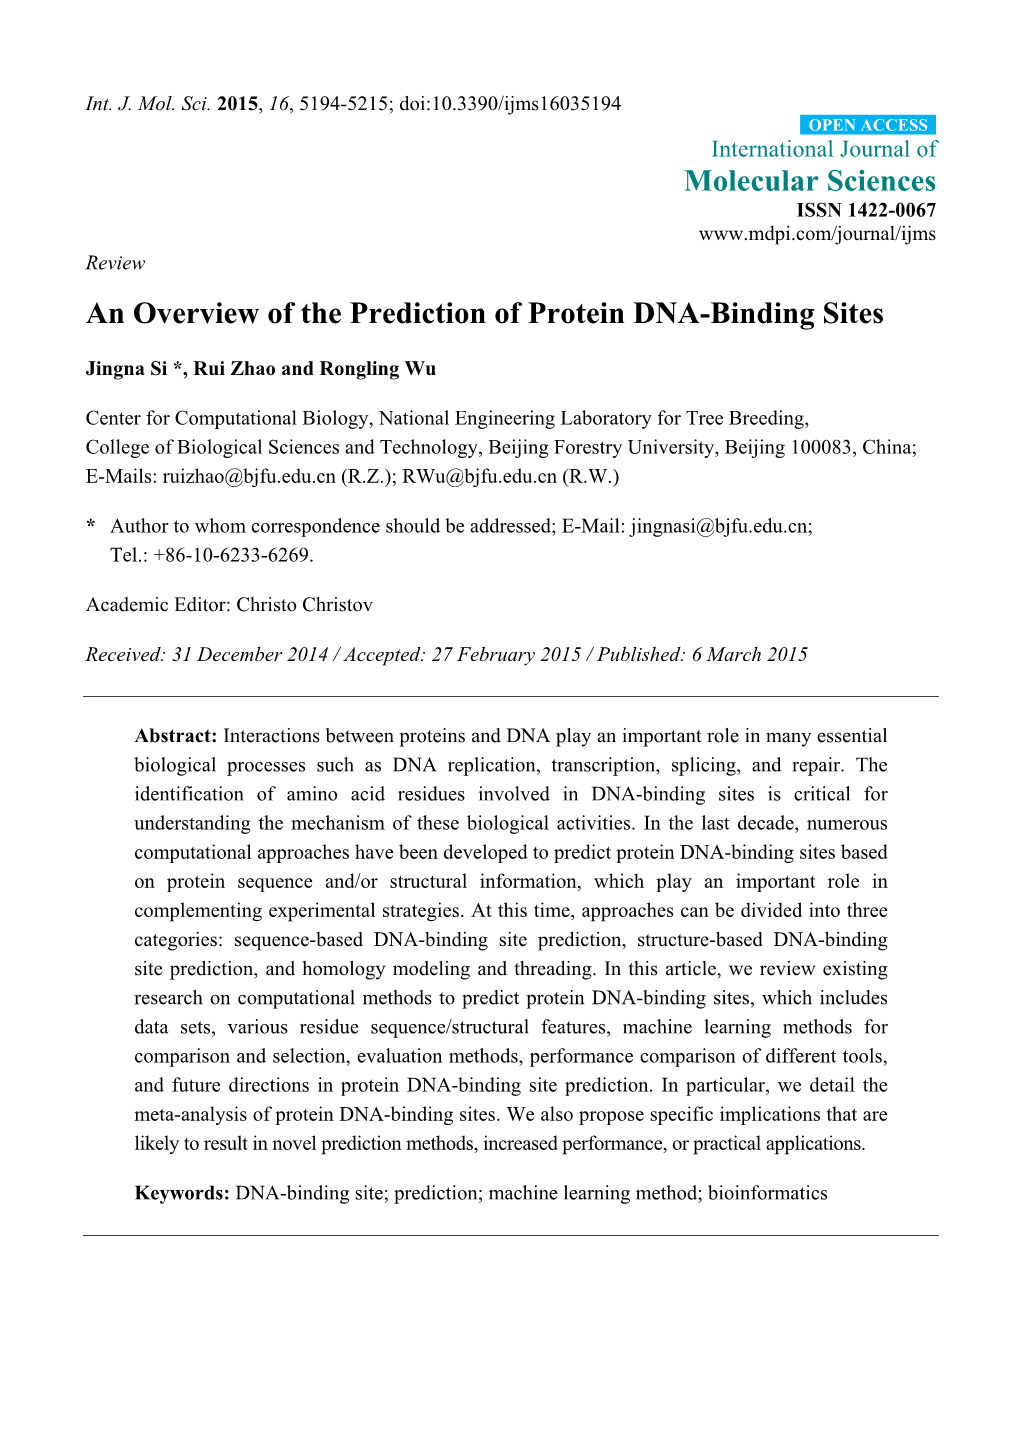 An Overview of the Prediction of Protein DNA-Binding Sites